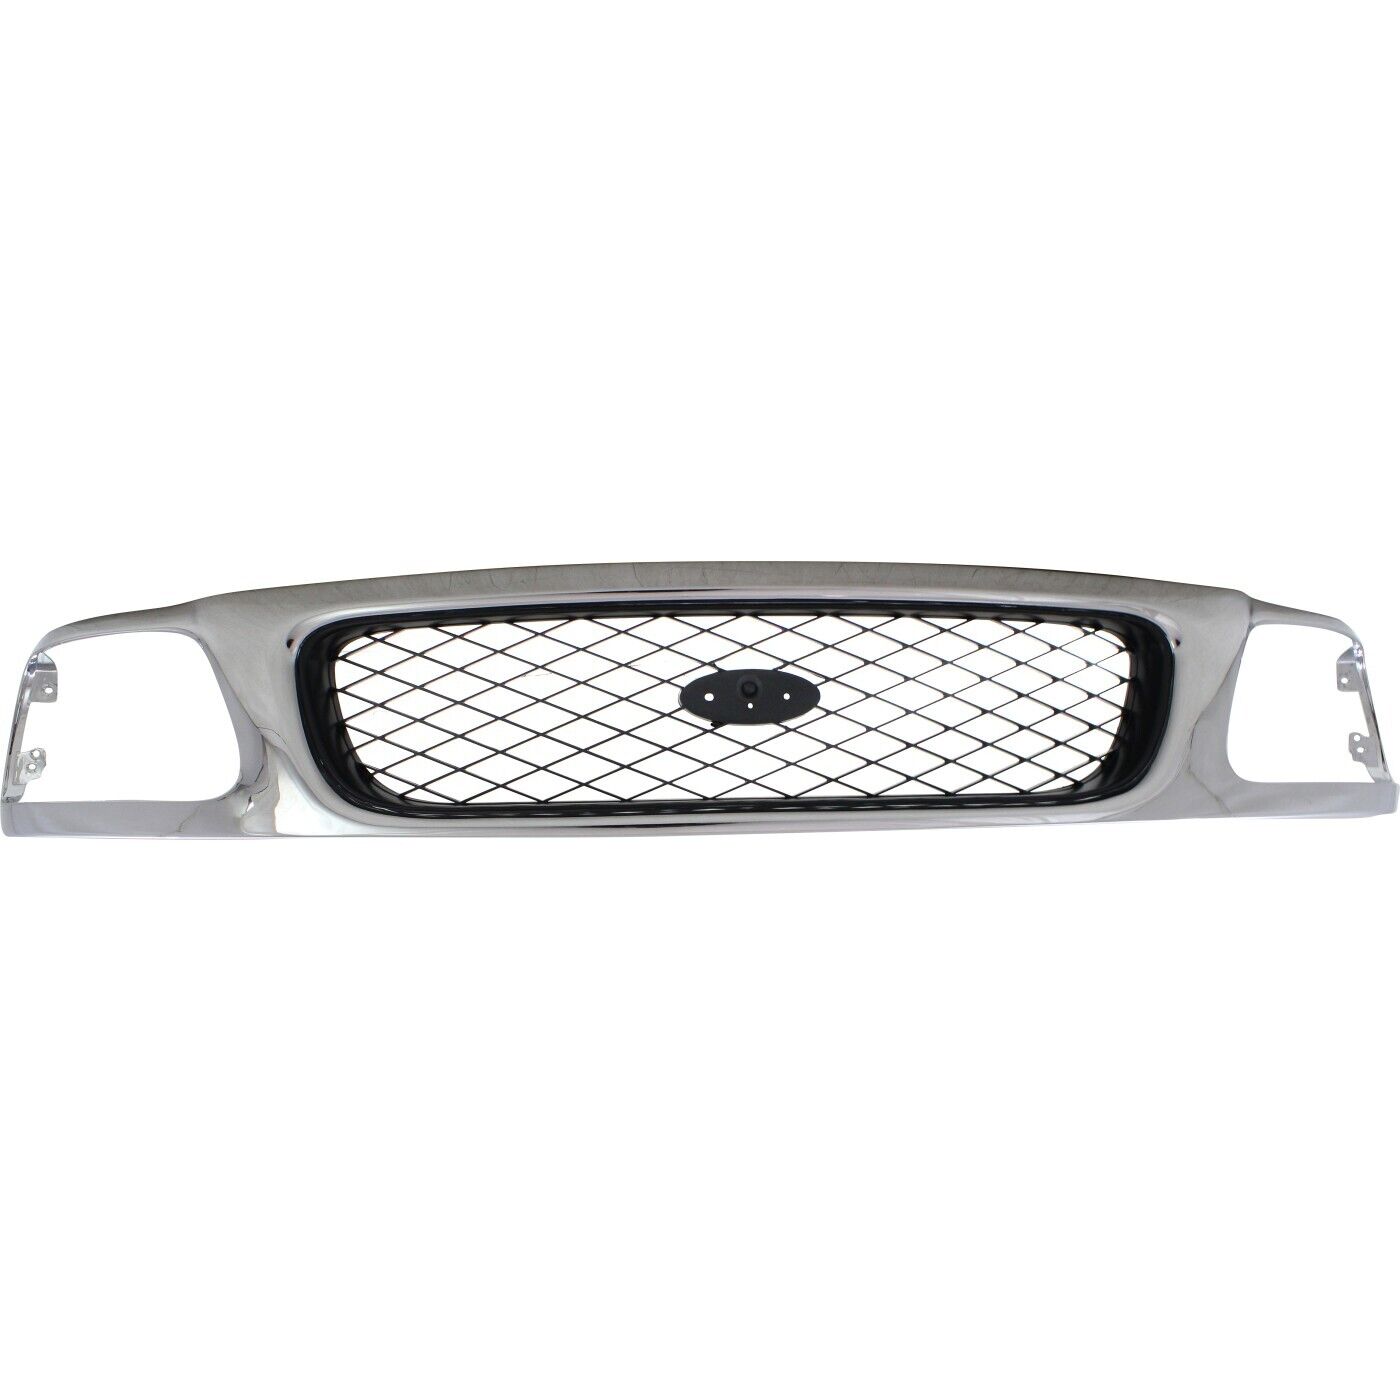 Grille For 97-98 Ford F-150 F-250 Chrome Shell w/ Silver Insert Plastic